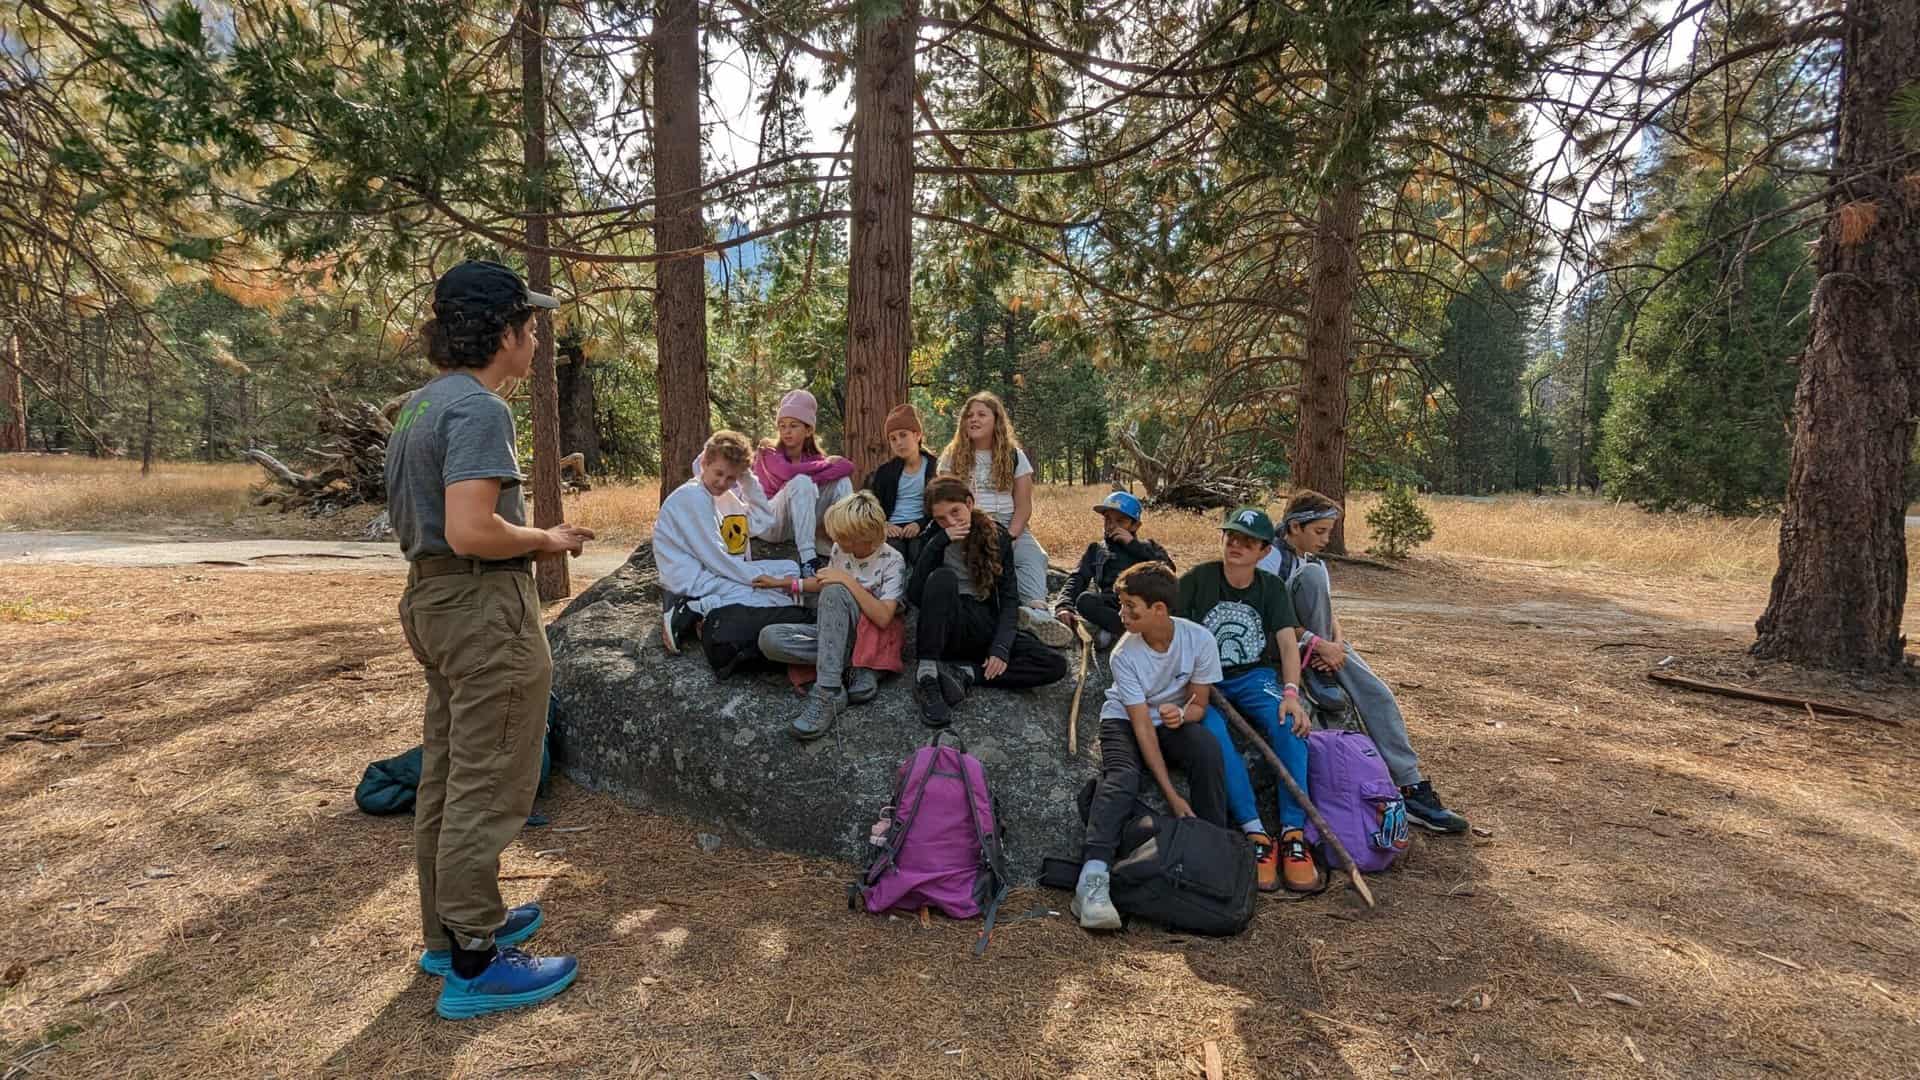 While participating in an experiential learning trip to the mountains, students sit on a rock while listening to their instructor.